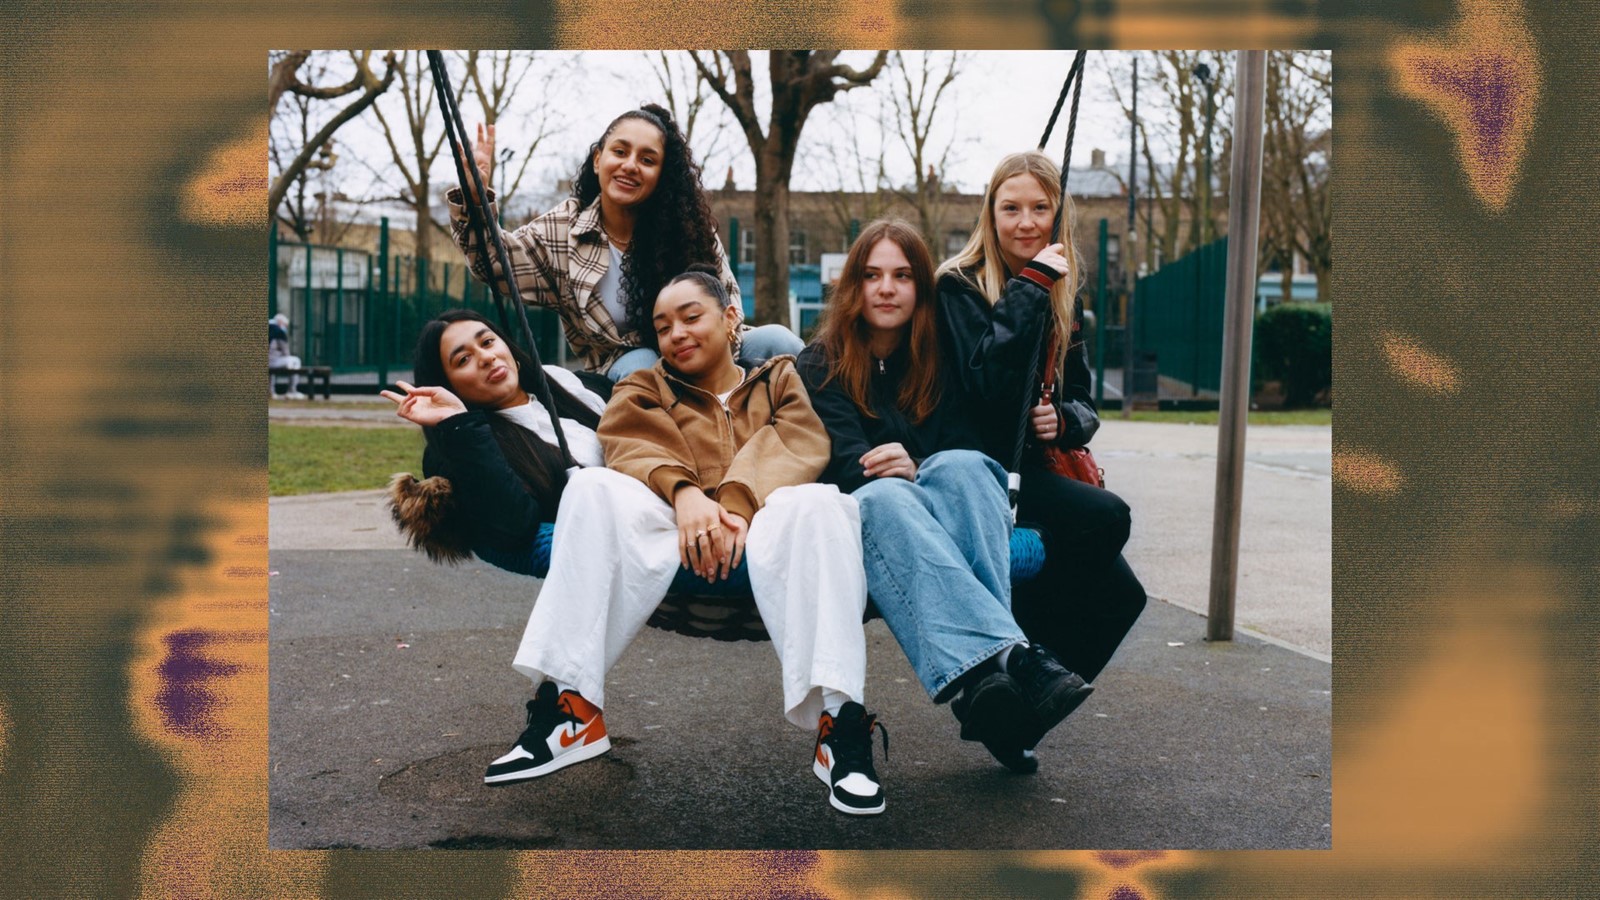 How do London’s teenage girls see the future of the city?